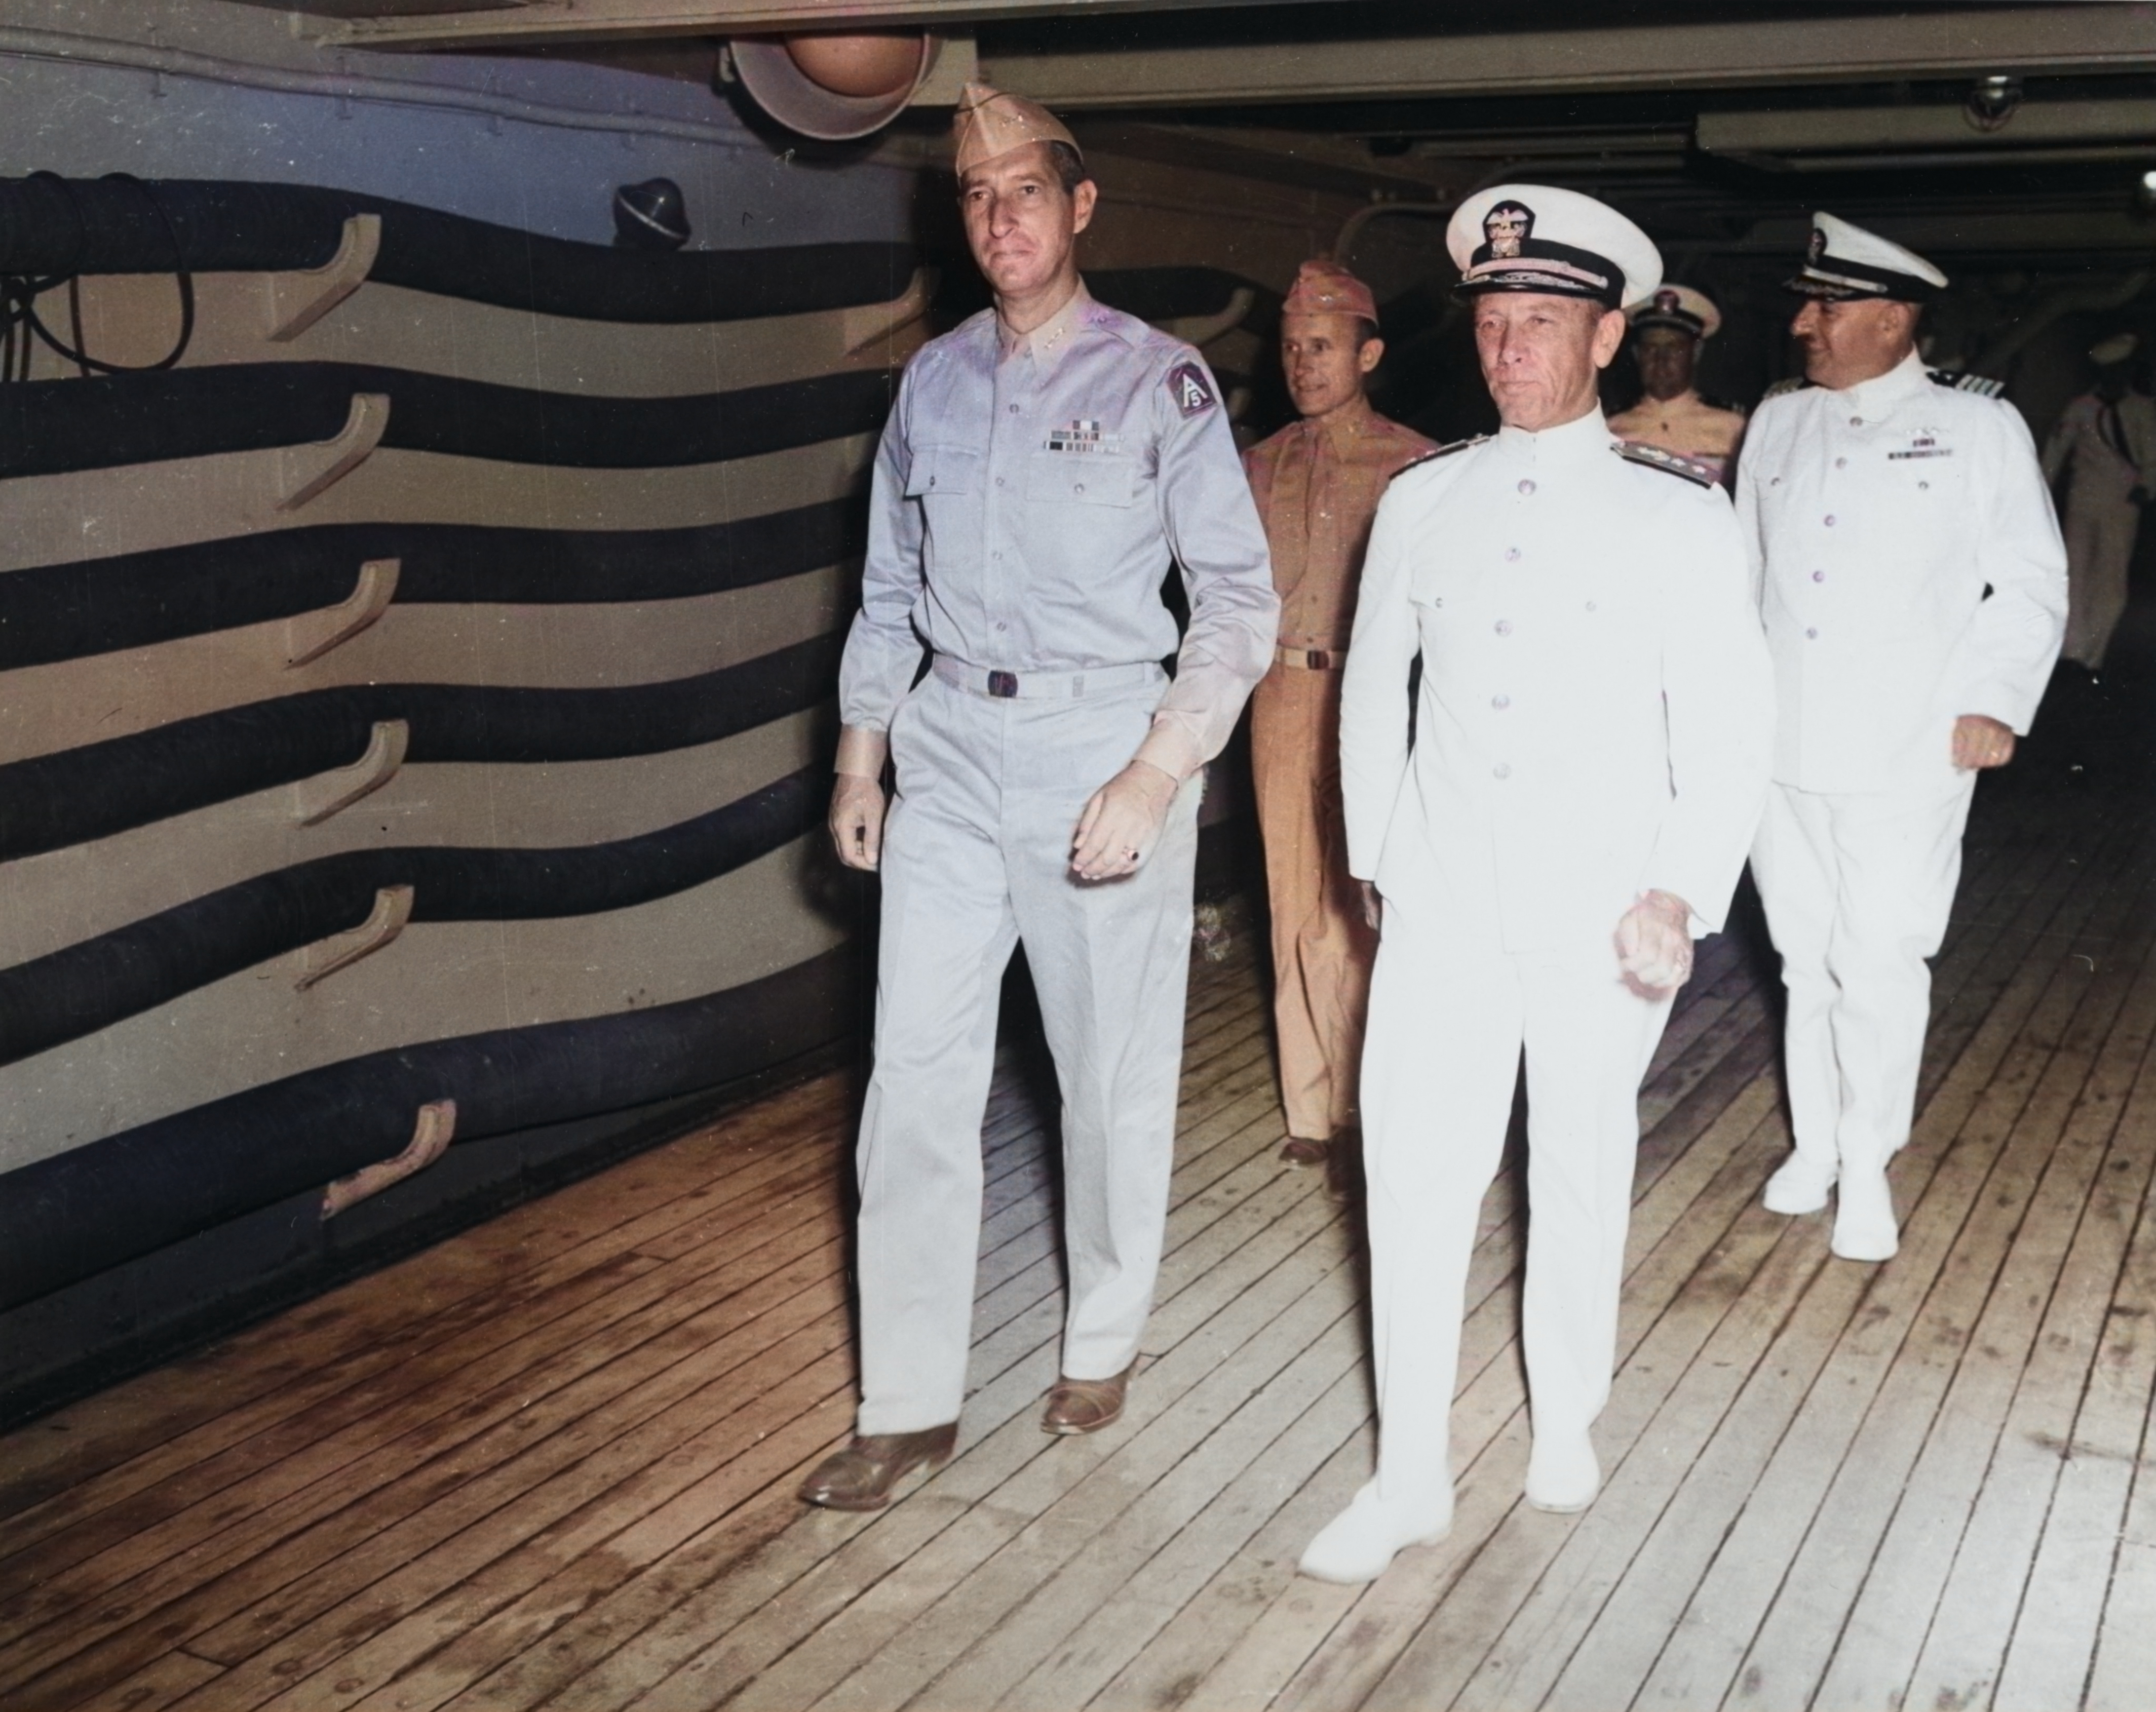 Lieutenant General Mark Clark and Navy Rear Admiral Alan Kirk aboard command ship USS Ancon during the Sicily operations, Mers-el-Kebir, Oran, Algeria, 18 Jul 1943. [Colorized by WW2DB]